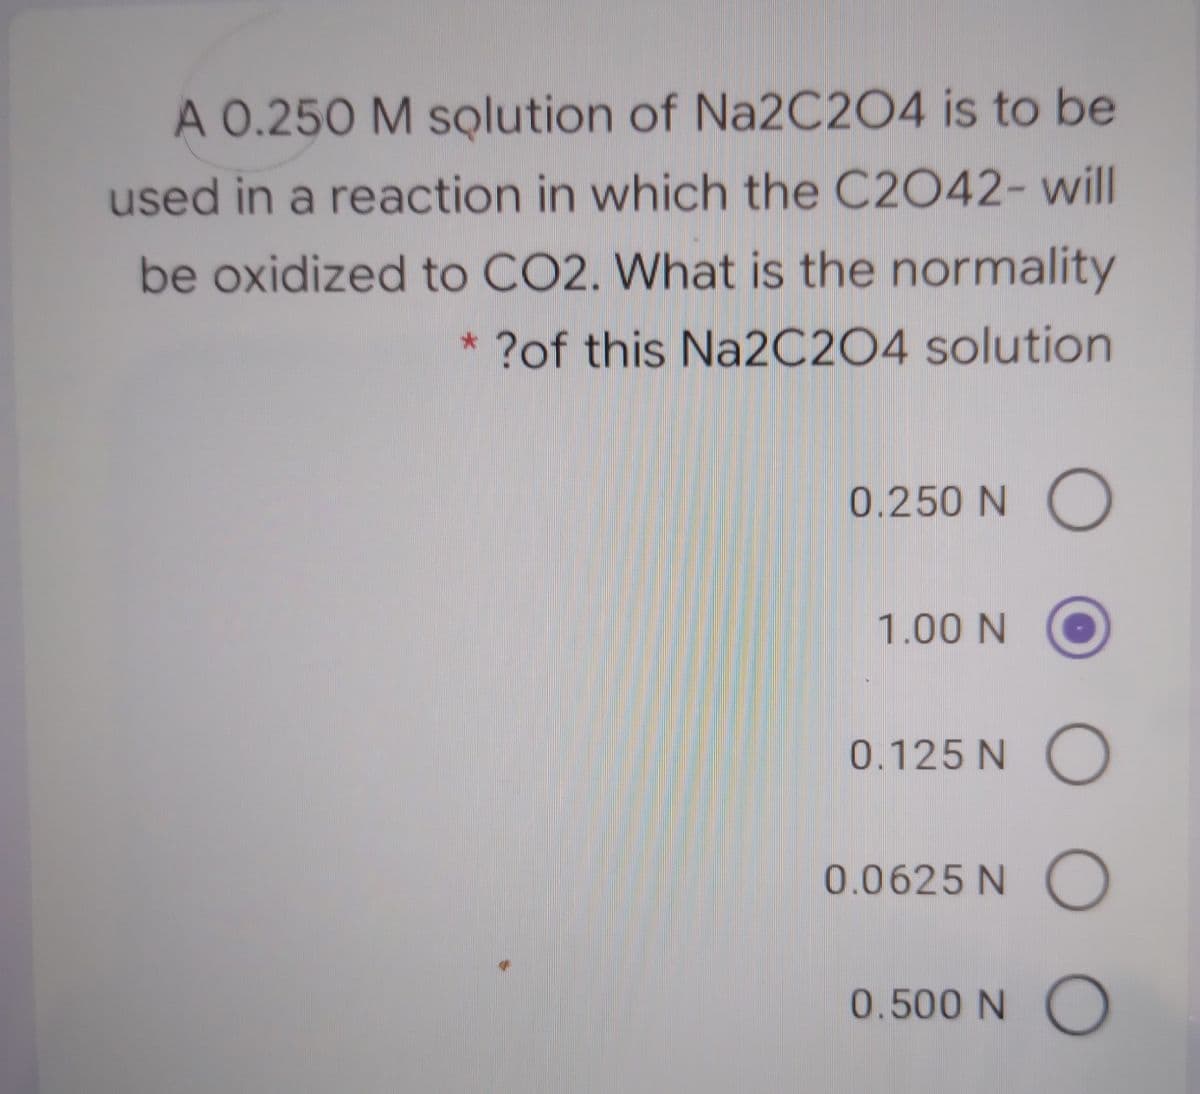 A 0.250 M solution of Na2C204 is to be
used in a reaction in which the C2042- will
be oxidized to CO2. What is the normality
* ?of this Na2C2O4 solution
0.250 N O
1.00 N
0.125 N O
0.0625 N )
0.500 NO
